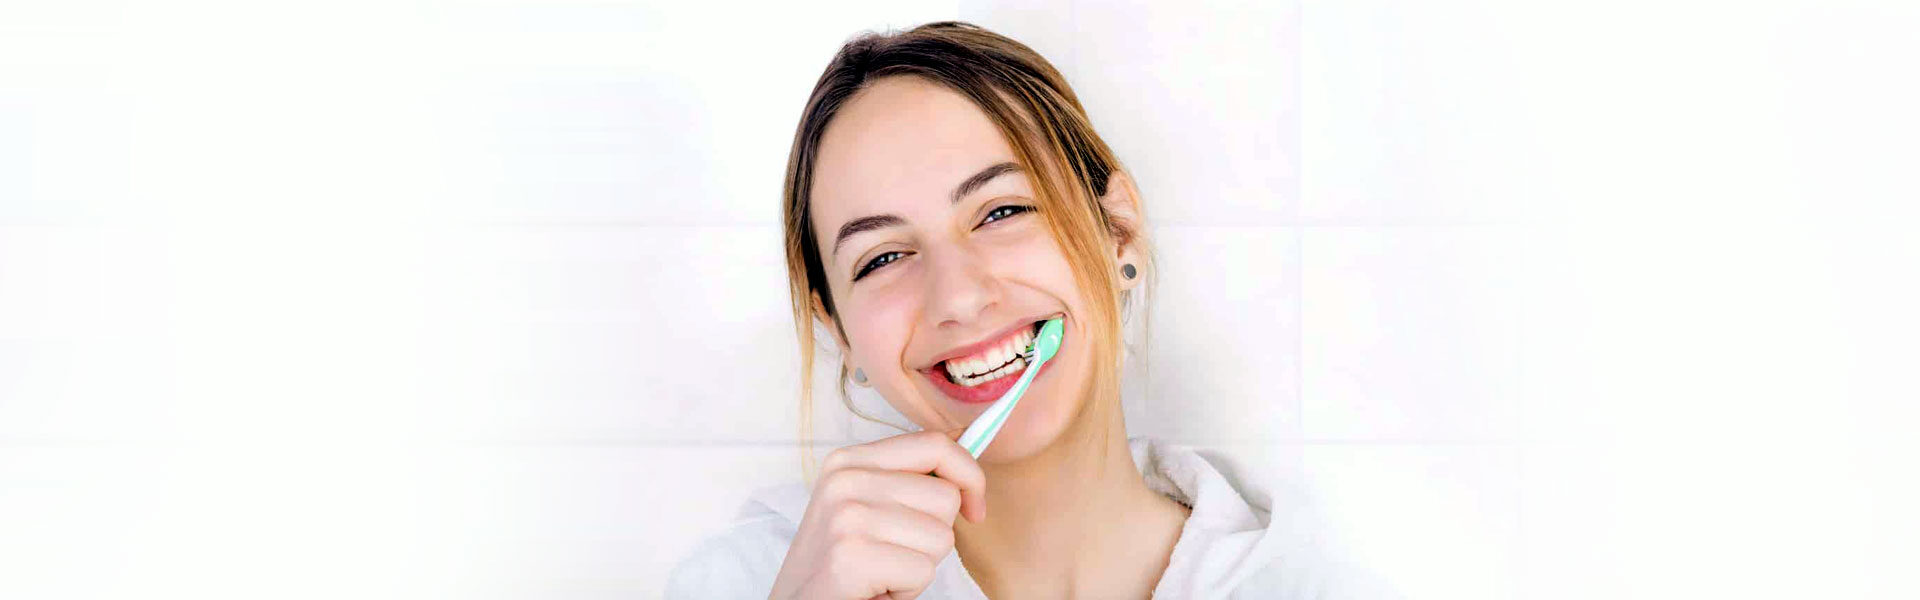 Home Tooth Whitening in East Walpole, MA